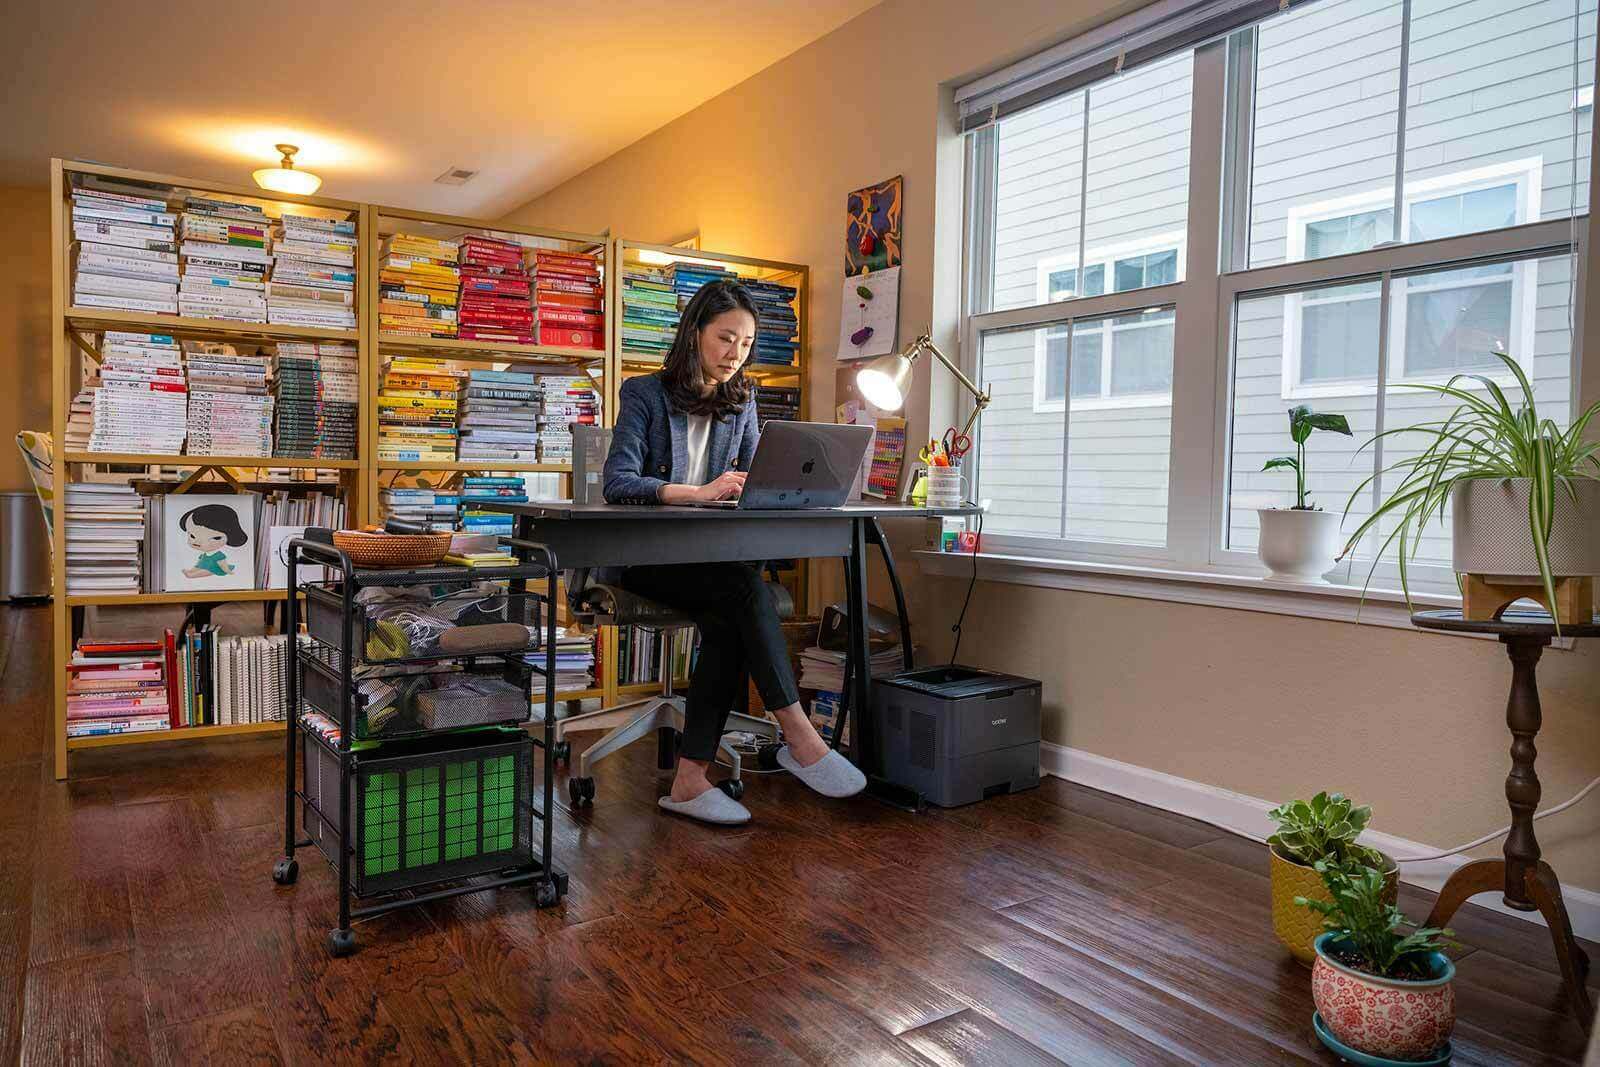 A woman sits at a desk, working on a laptop. A large book shelf is behind her full of color coordinated books.